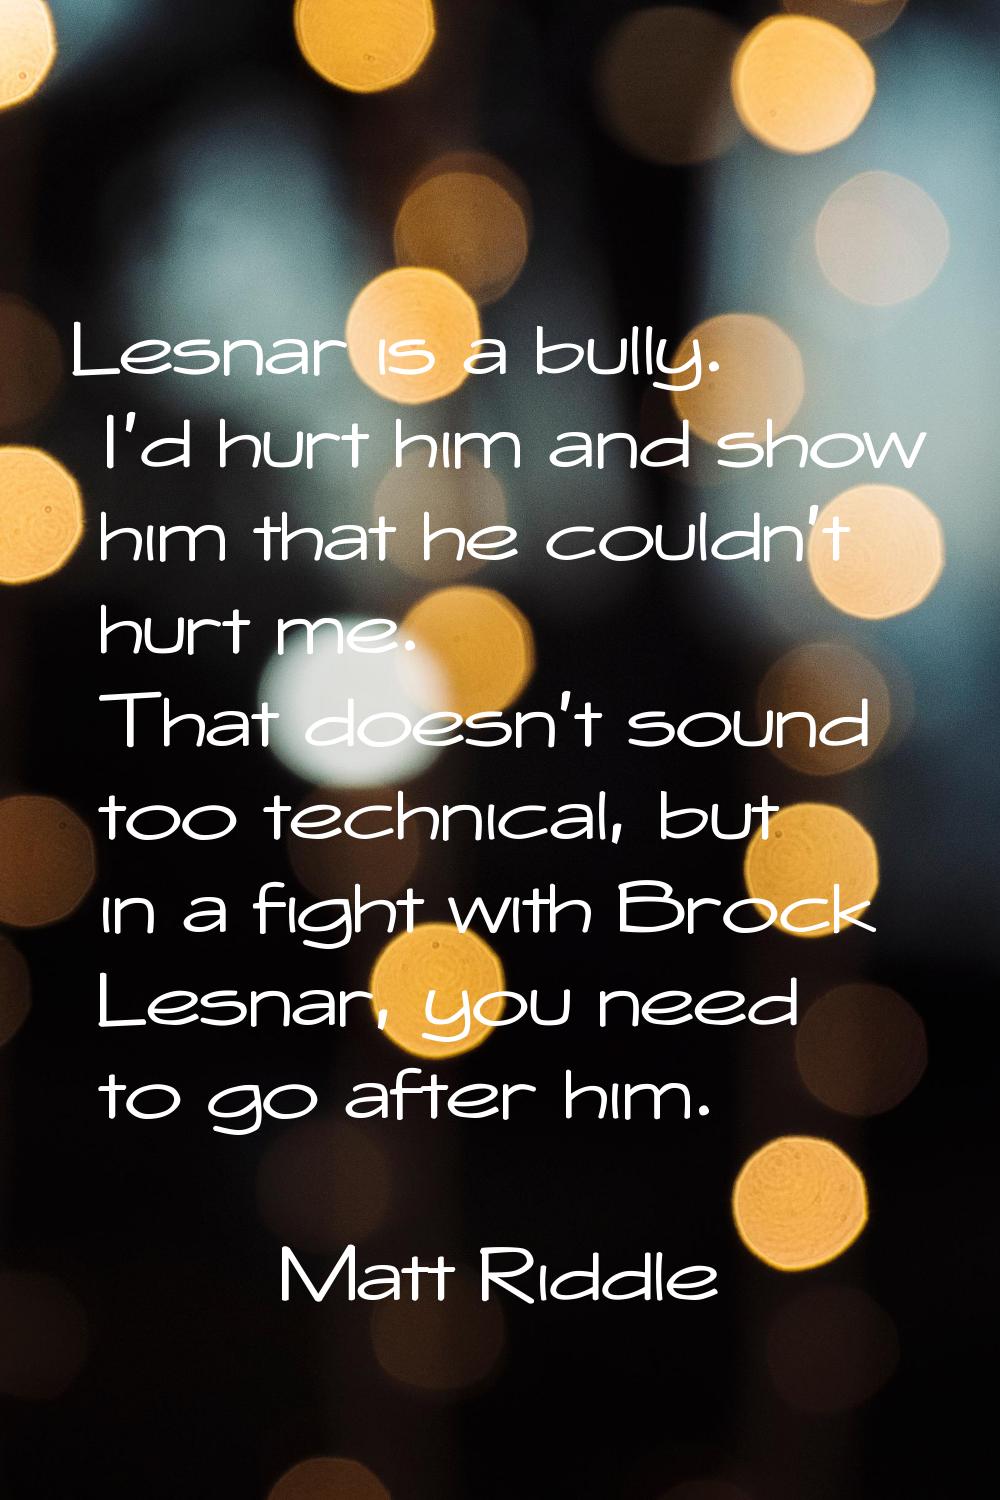 Lesnar is a bully. I'd hurt him and show him that he couldn't hurt me. That doesn't sound too techn